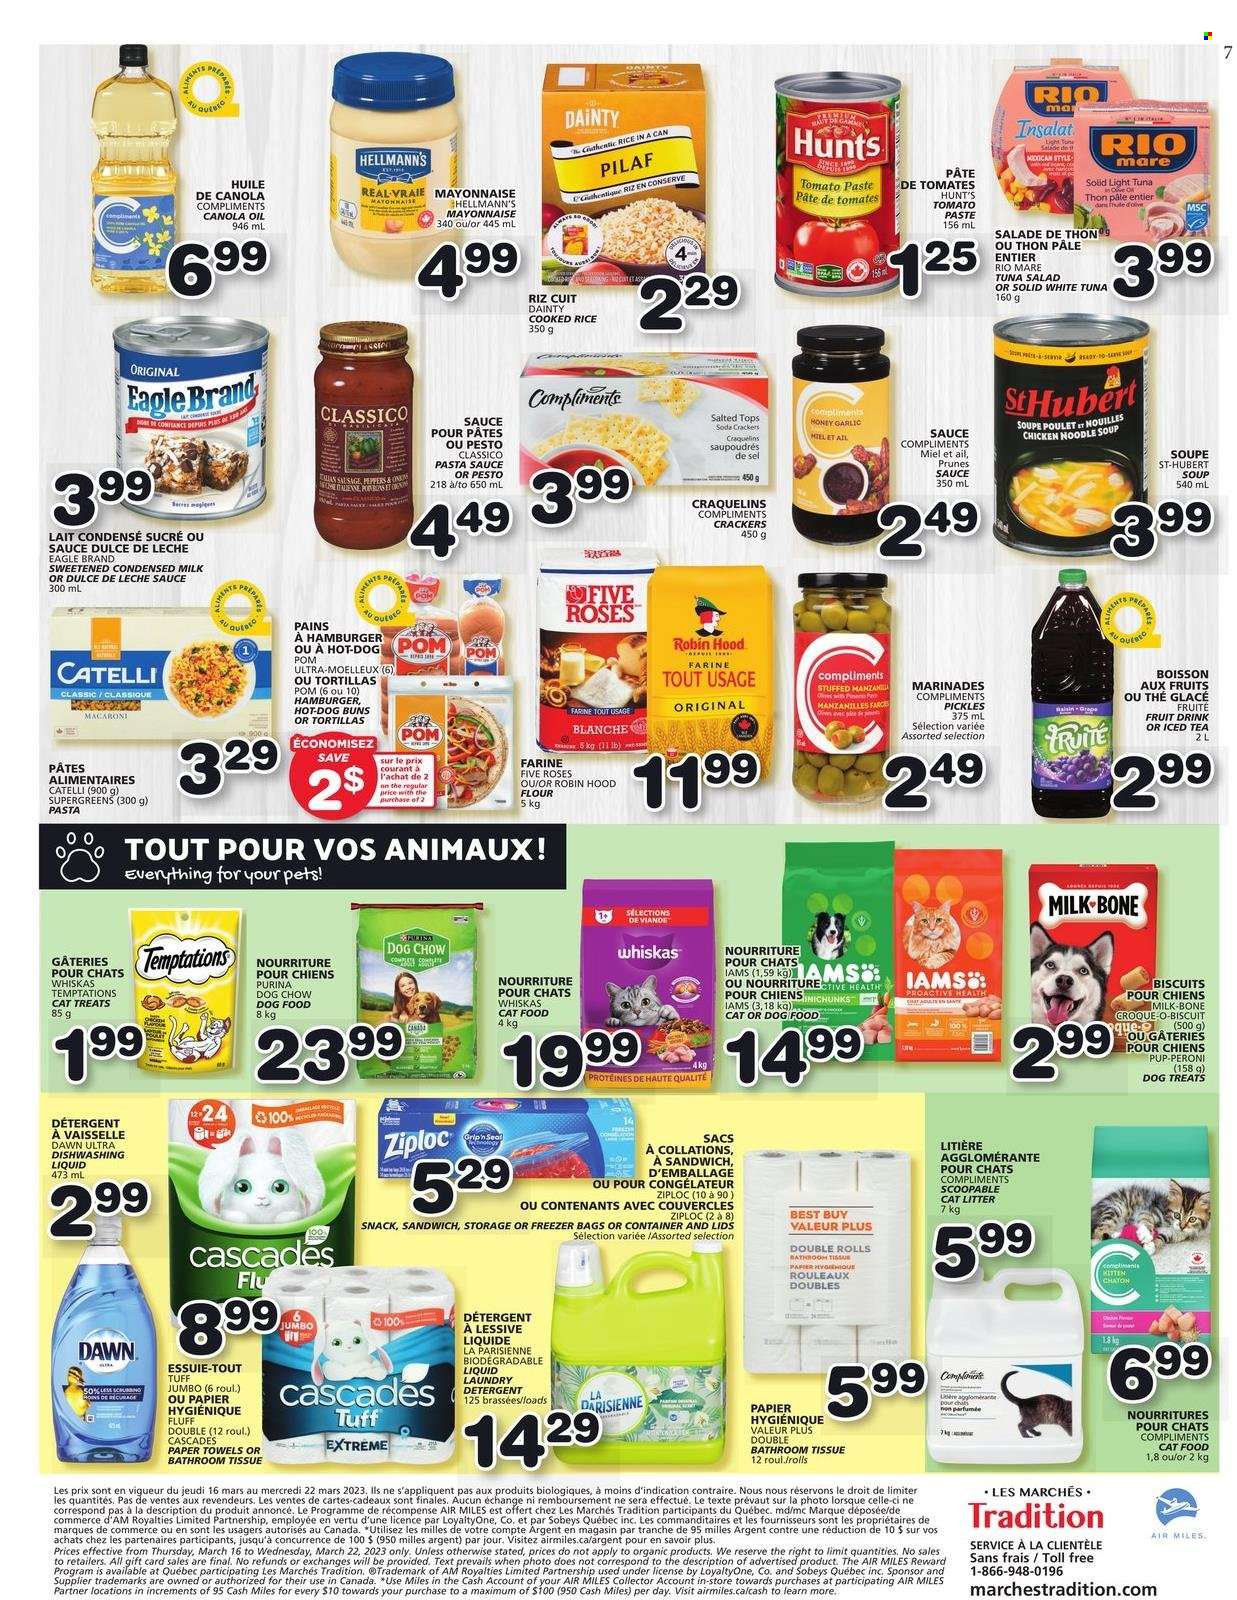 thumbnail - Les Marchés Tradition Flyer - March 16, 2023 - March 22, 2023 - Sales products - tortillas, buns, garlic, peppers, pasta sauce, sandwich, macaroni, soup, hamburger, noodles cup, noodles, sausage, tuna salad, condensed milk, mayonnaise, Hellmann’s, snack, Mars, crackers, biscuit, tomato paste, pickles, light tuna, rice, Classico, canola oil, oil, honey, prunes, dried fruit, fruit drink, ice tea, beer, bath tissue, kitchen towels, paper towels, laundry detergent, dishwashing liquid, bag, Ziploc, animal food, cat food, dog food, Dog Chow, Purina, Pup-Peroni, Iams, detergent, pesto, Whiskas. Page 8.